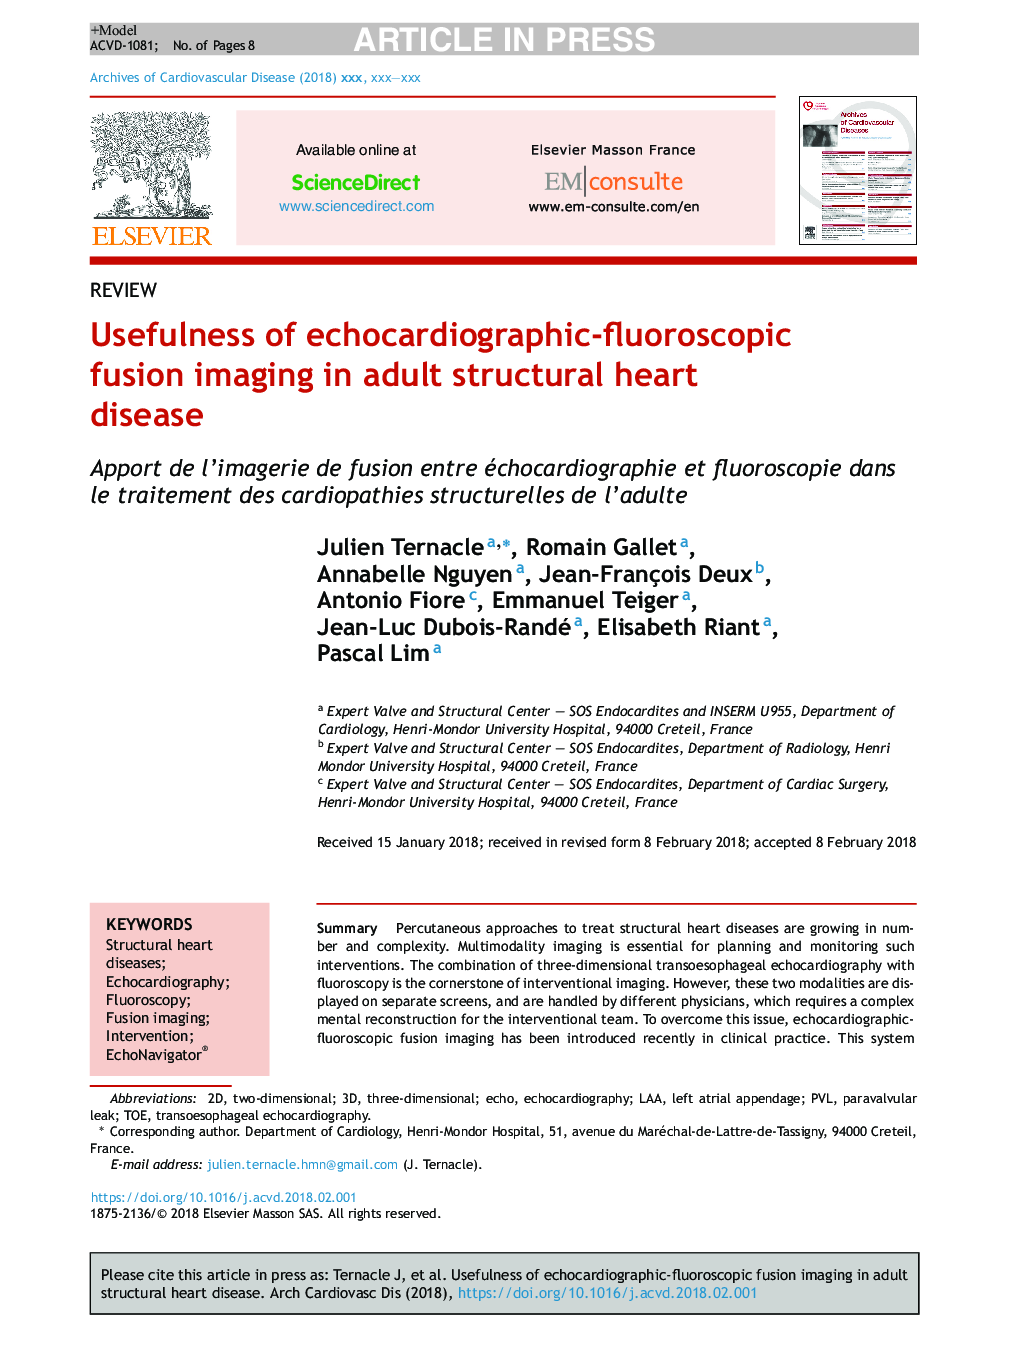 Usefulness of echocardiographic-fluoroscopic fusion imaging in adult structural heart disease